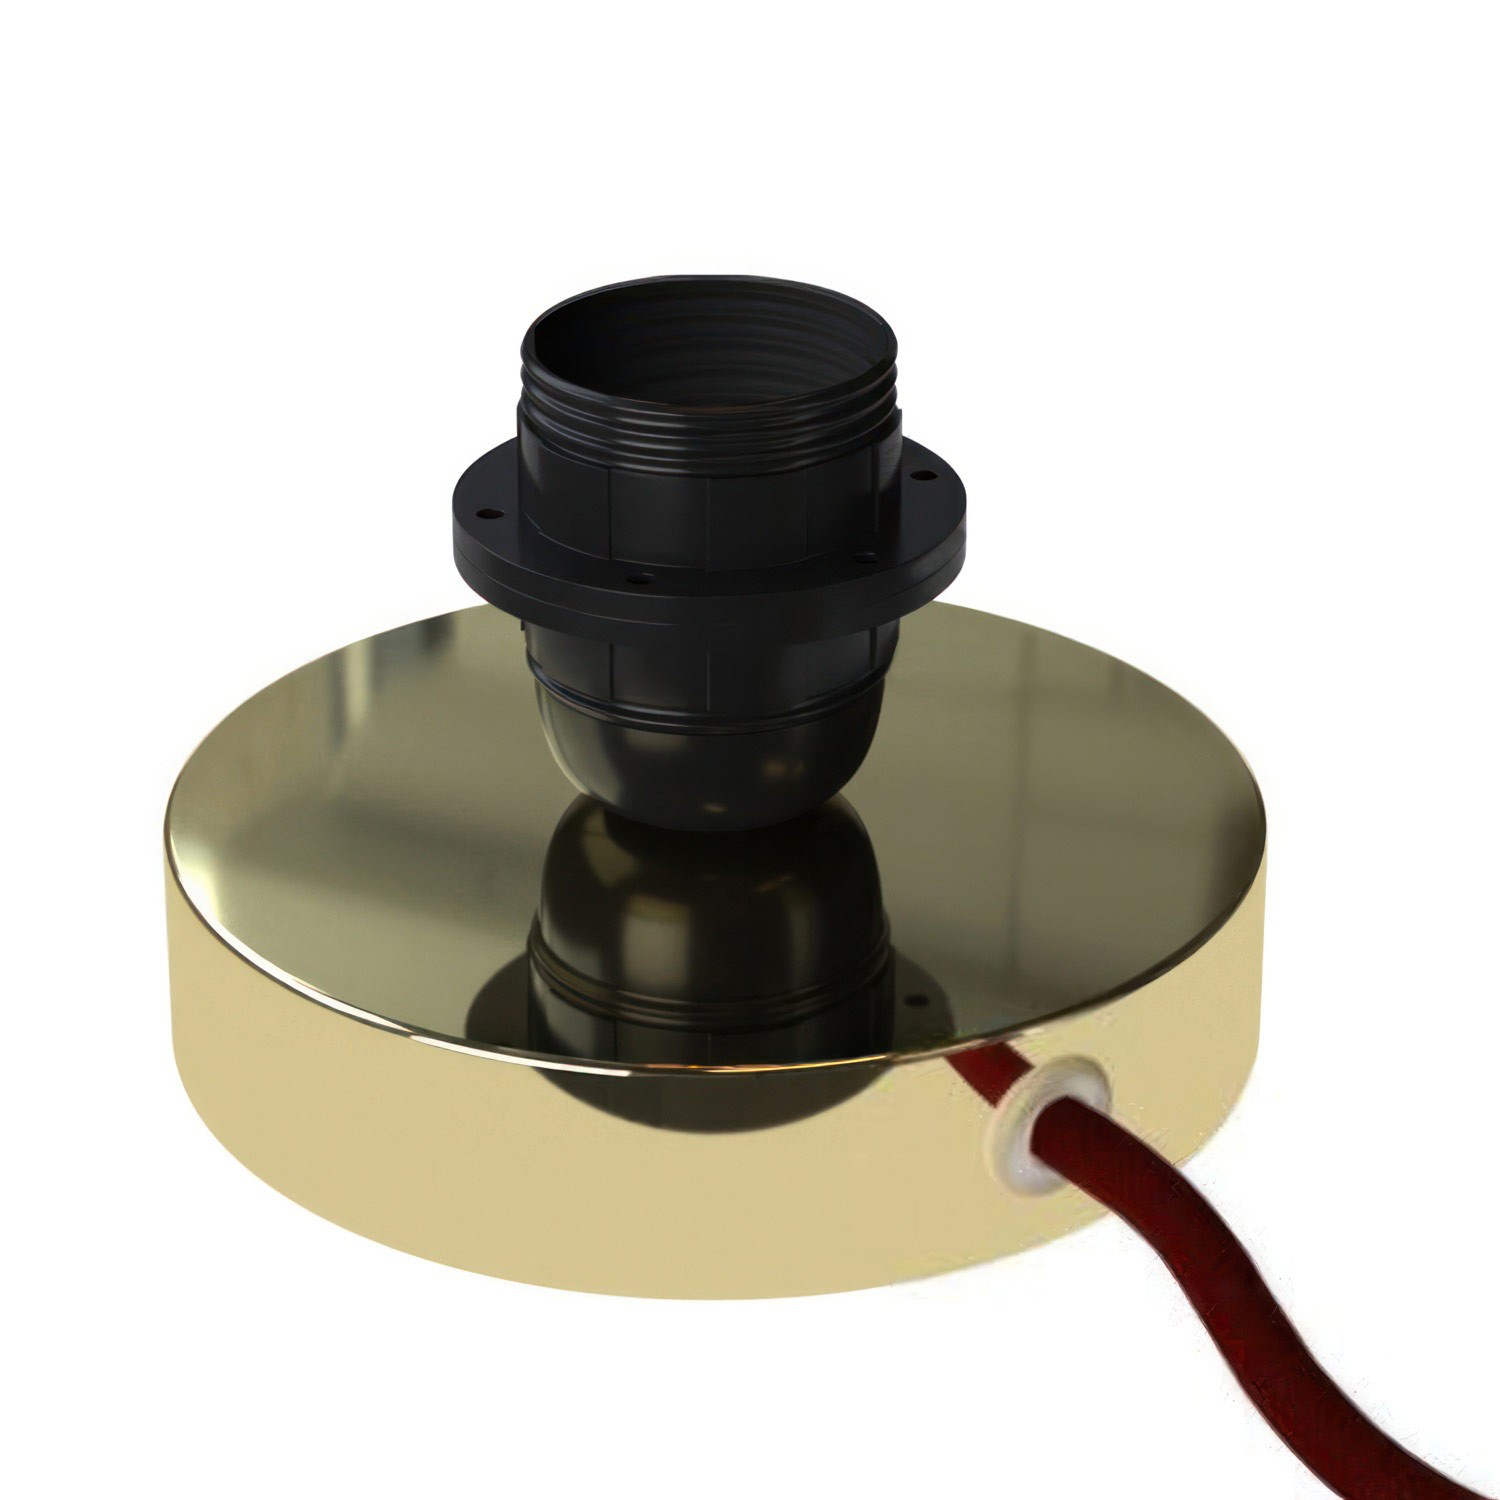 Posaluce for lampshade - Metal table lamp with UK plug